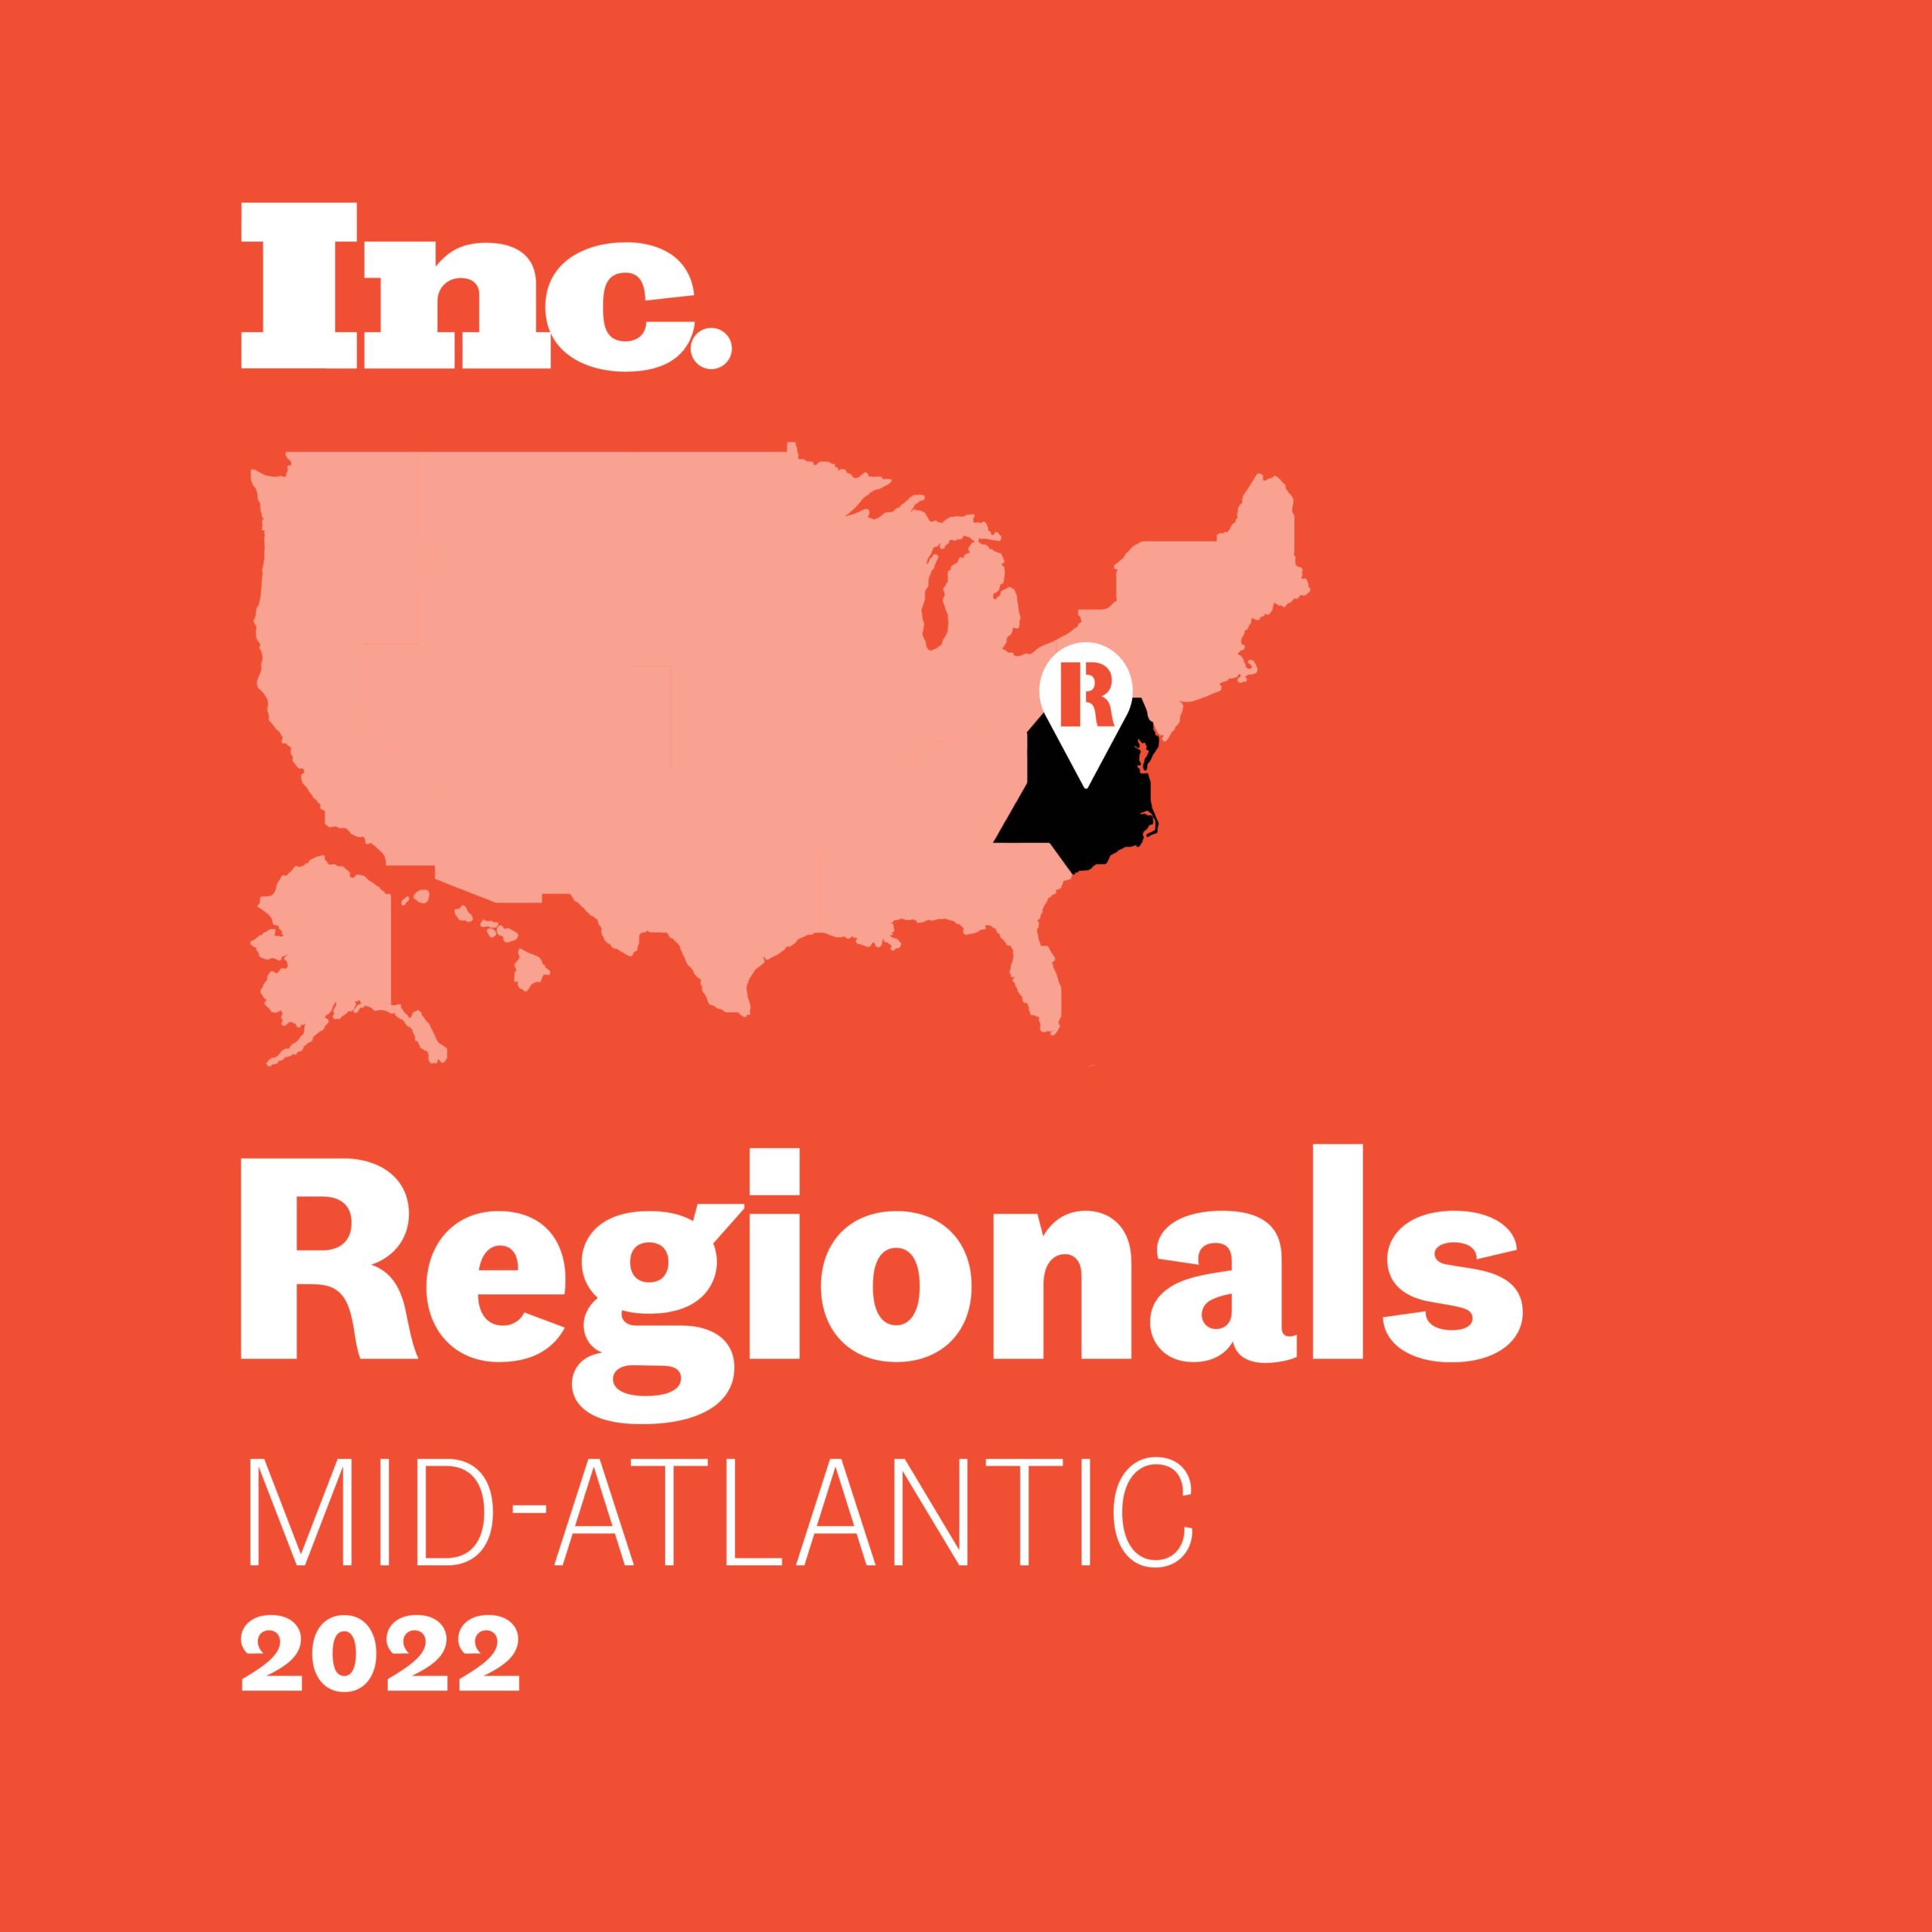 With a Two-Year Revenue Growth of 3,677%, SUMMIT HUMAN CAPITAL Ranks No. 1 on Inc. Magazine’s List of the Mid-Atlantic Region’s Fastest-Growing Private Companies